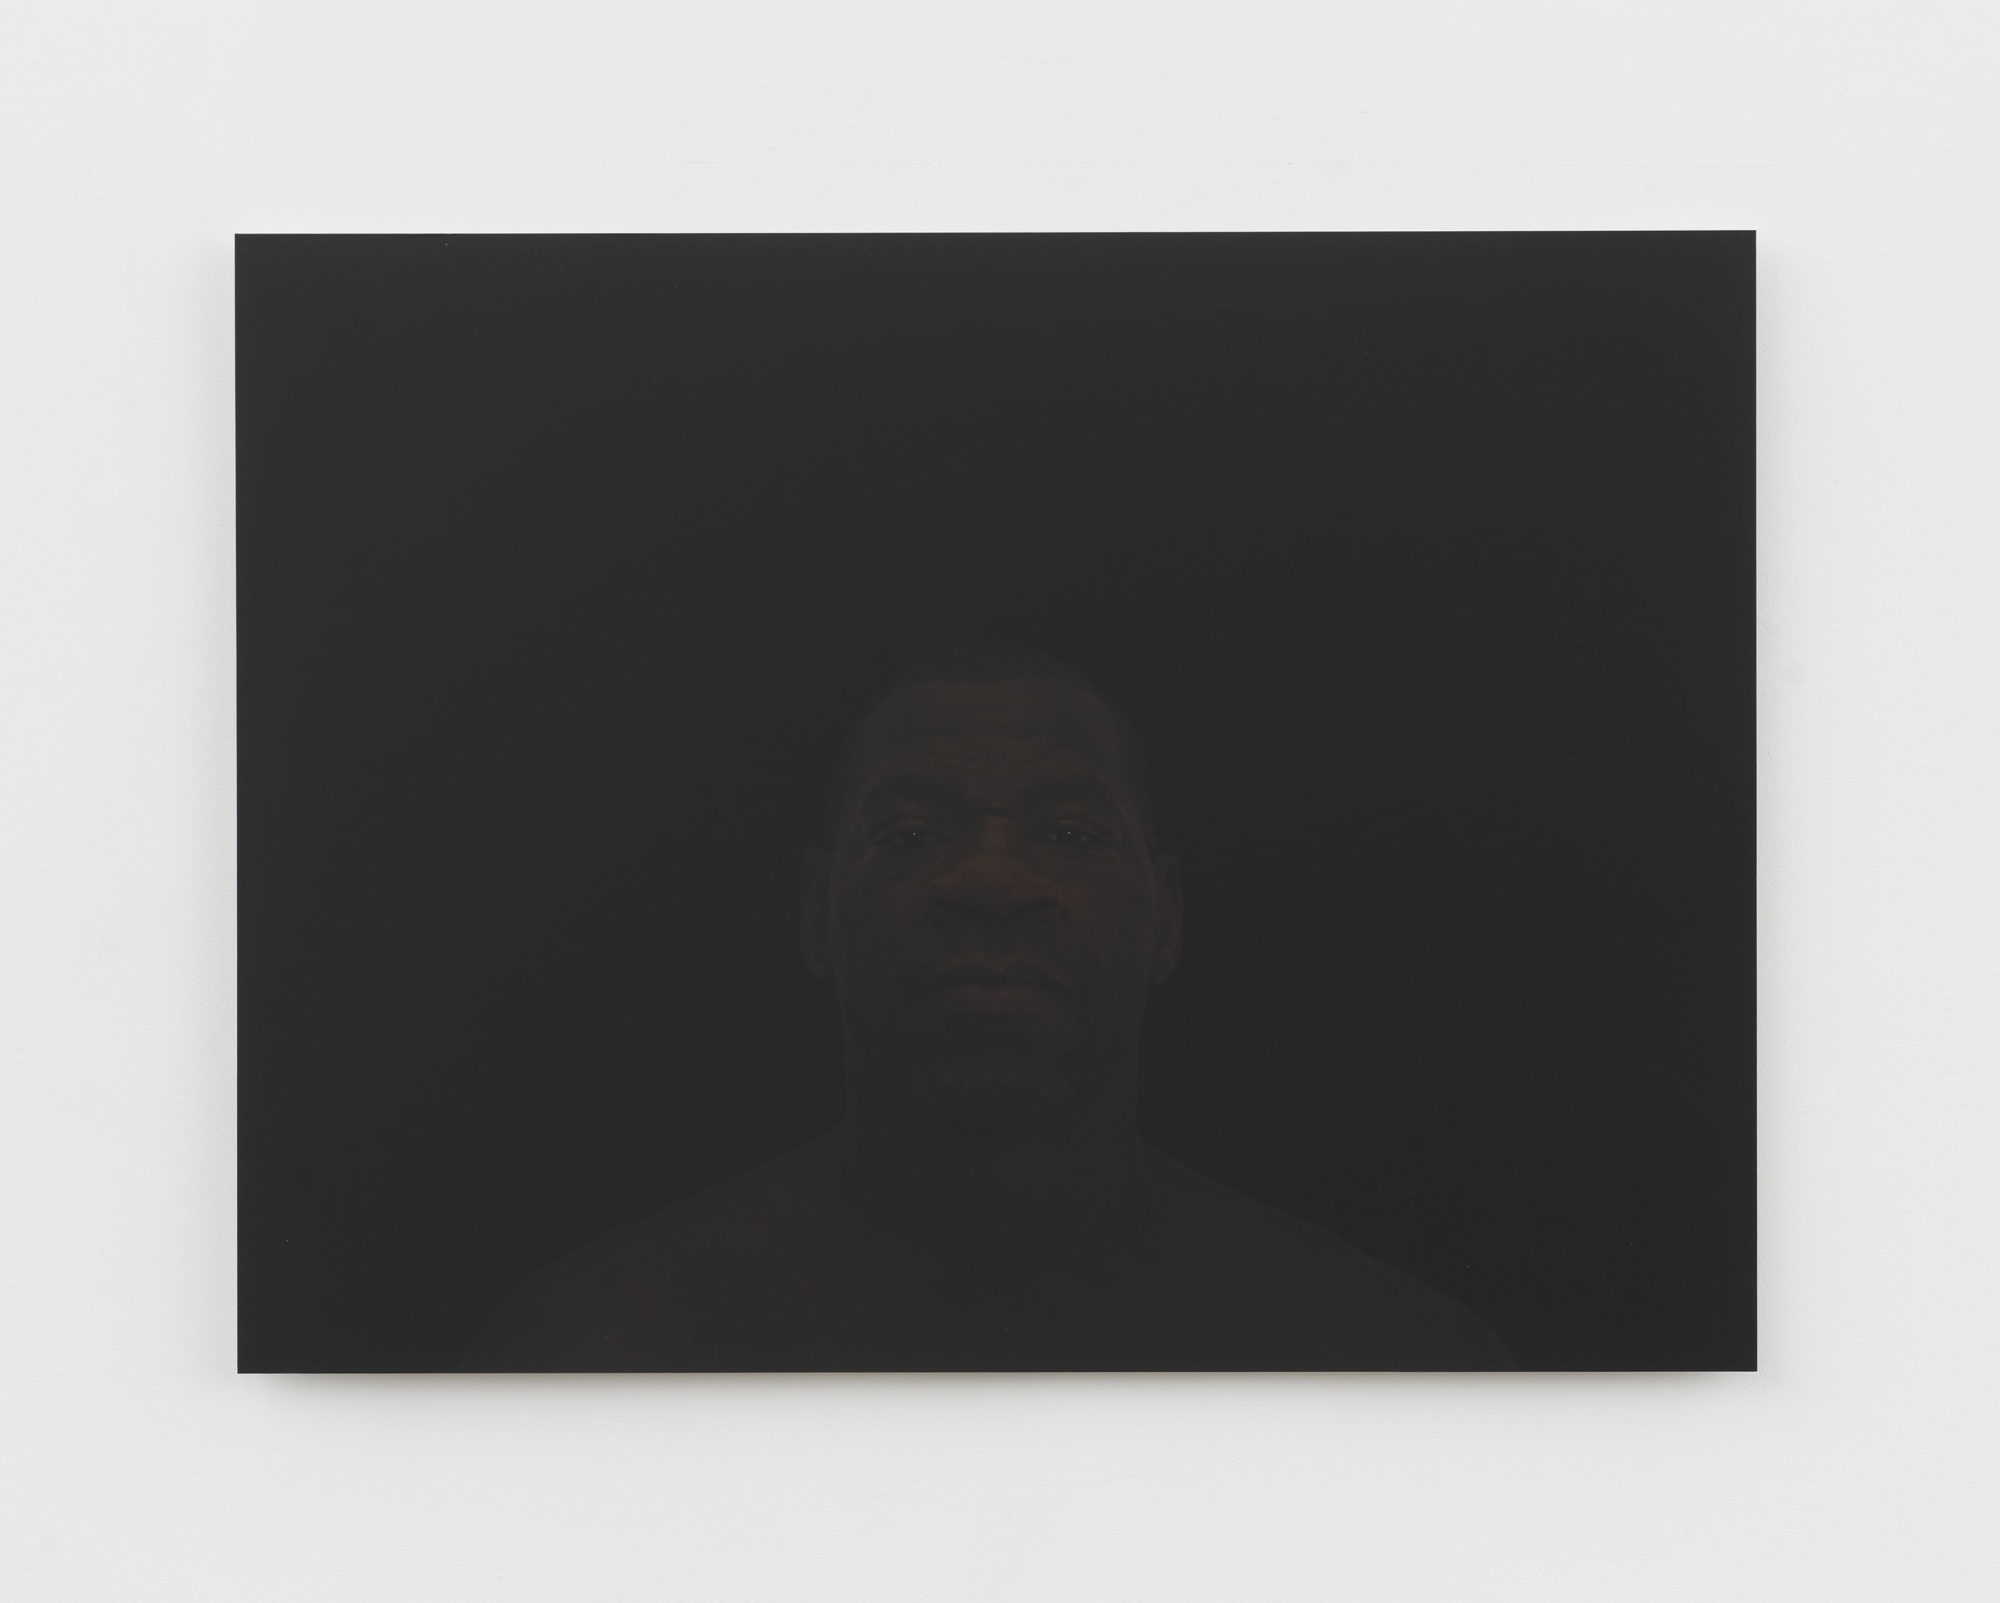 A straightforward portrait photograph of an older black man in front of a black background